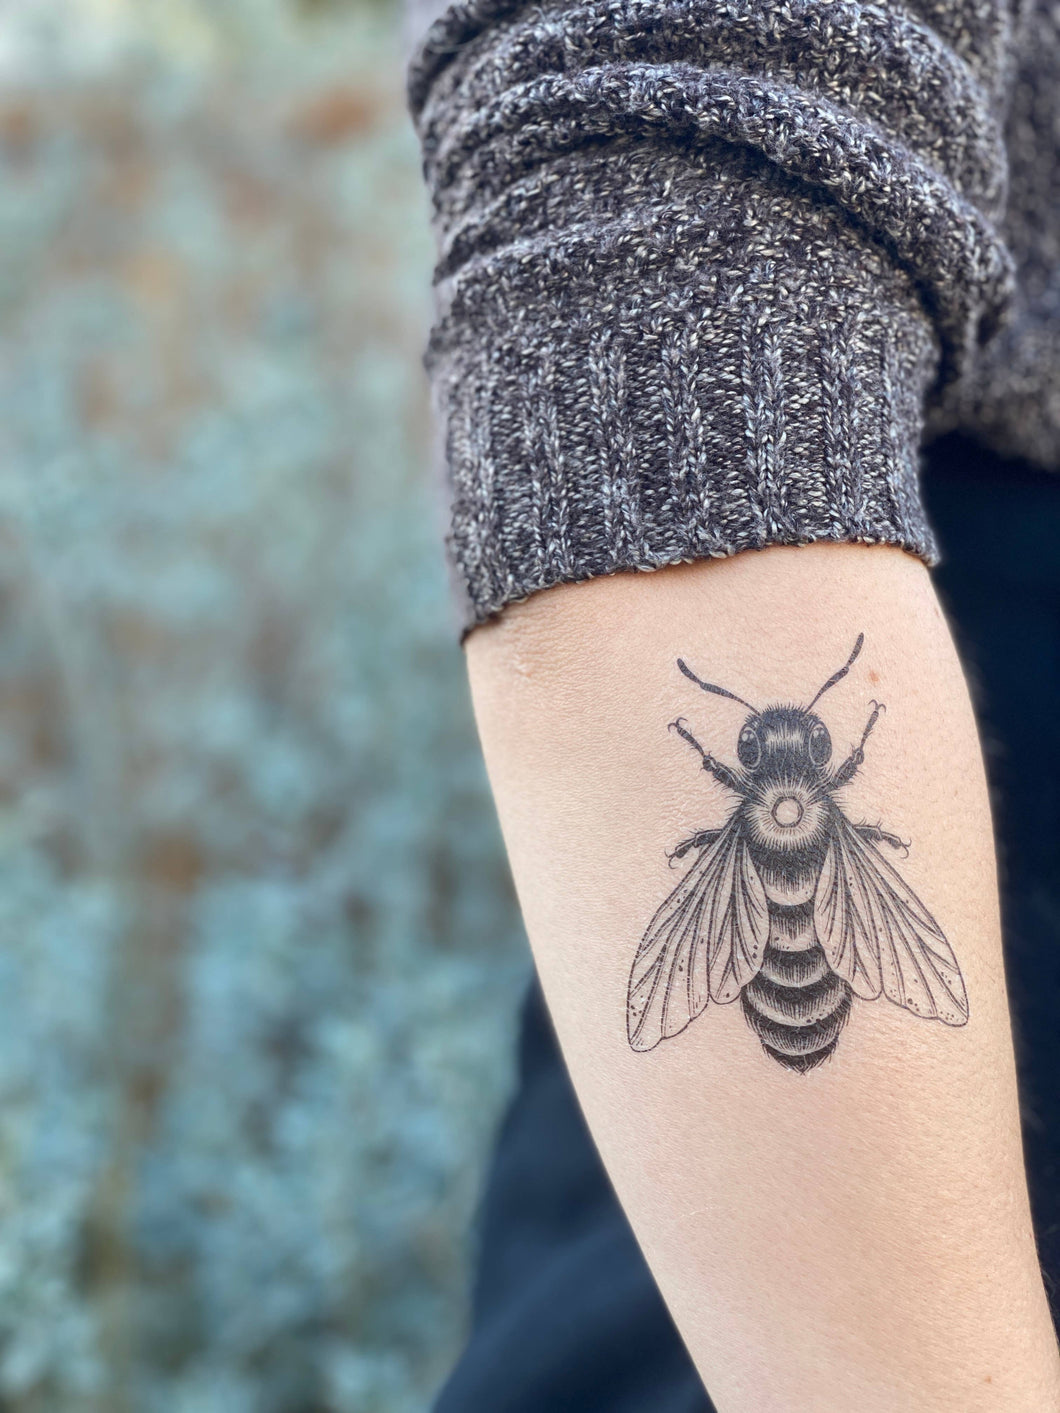 25 Pretty Bumble Bee Tattoo Designs For Your Inspiration  Women Fashion  Lifestyle Blog Shinecococom  Bee tattoo Bumble bee tattoo Tattoos for  women